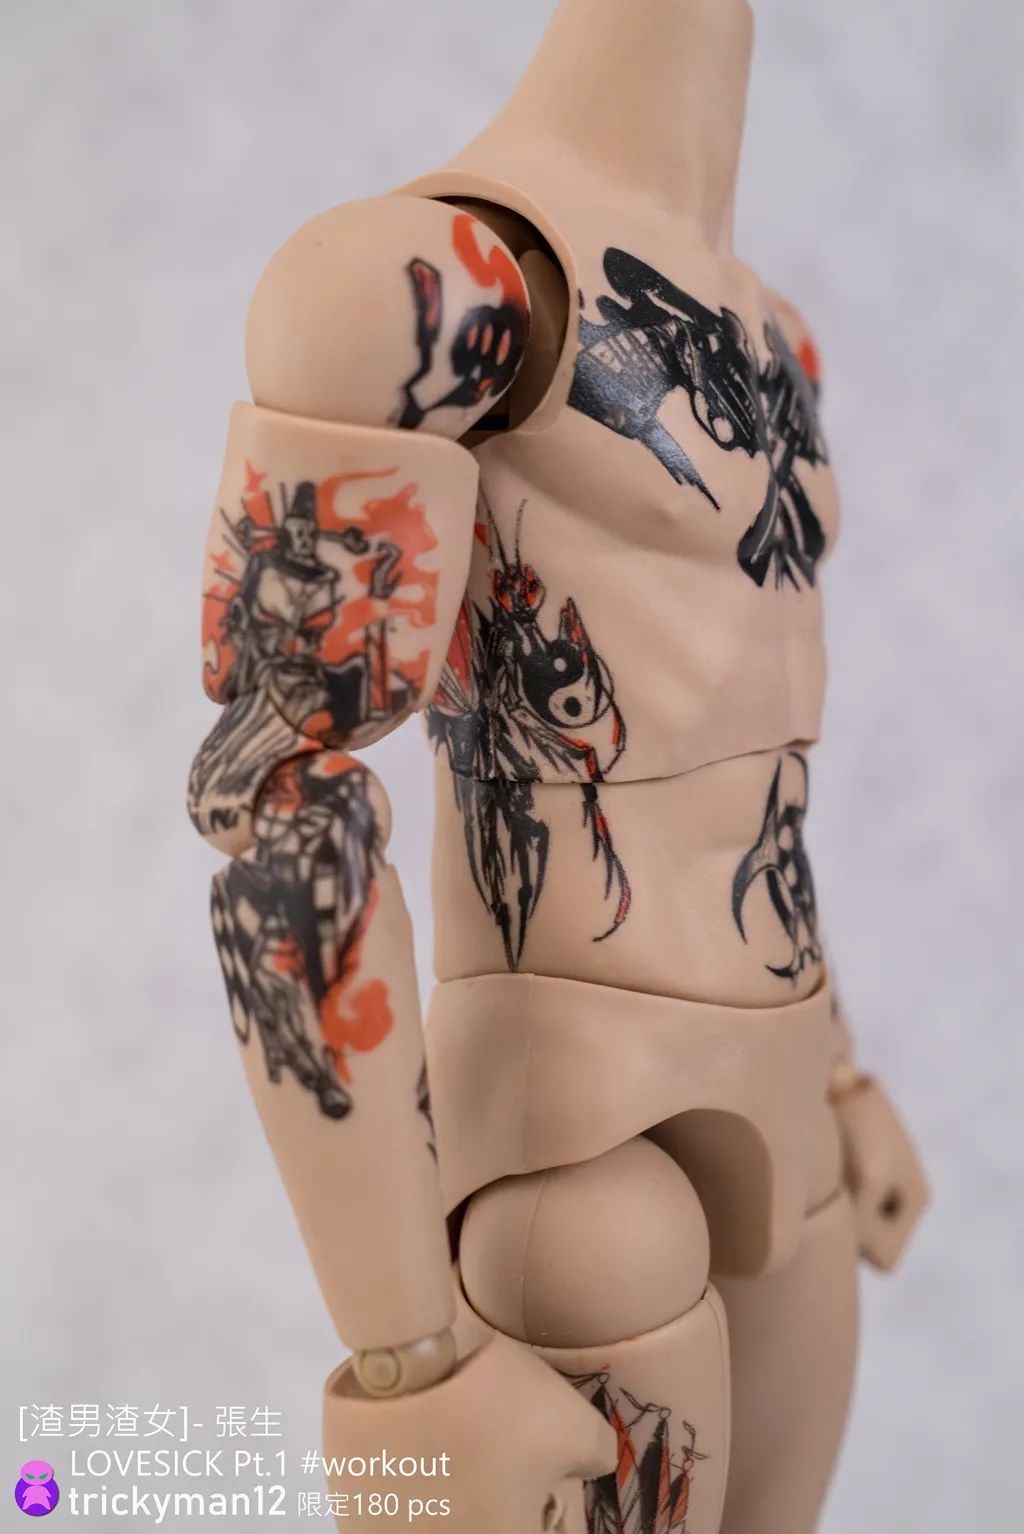 trickyMan12 - NEW PRODUCT: Trickyman12: 1/6 "Scumbag" series - Zhang Sheng LOVESICK Pt.1 action figure 17562711